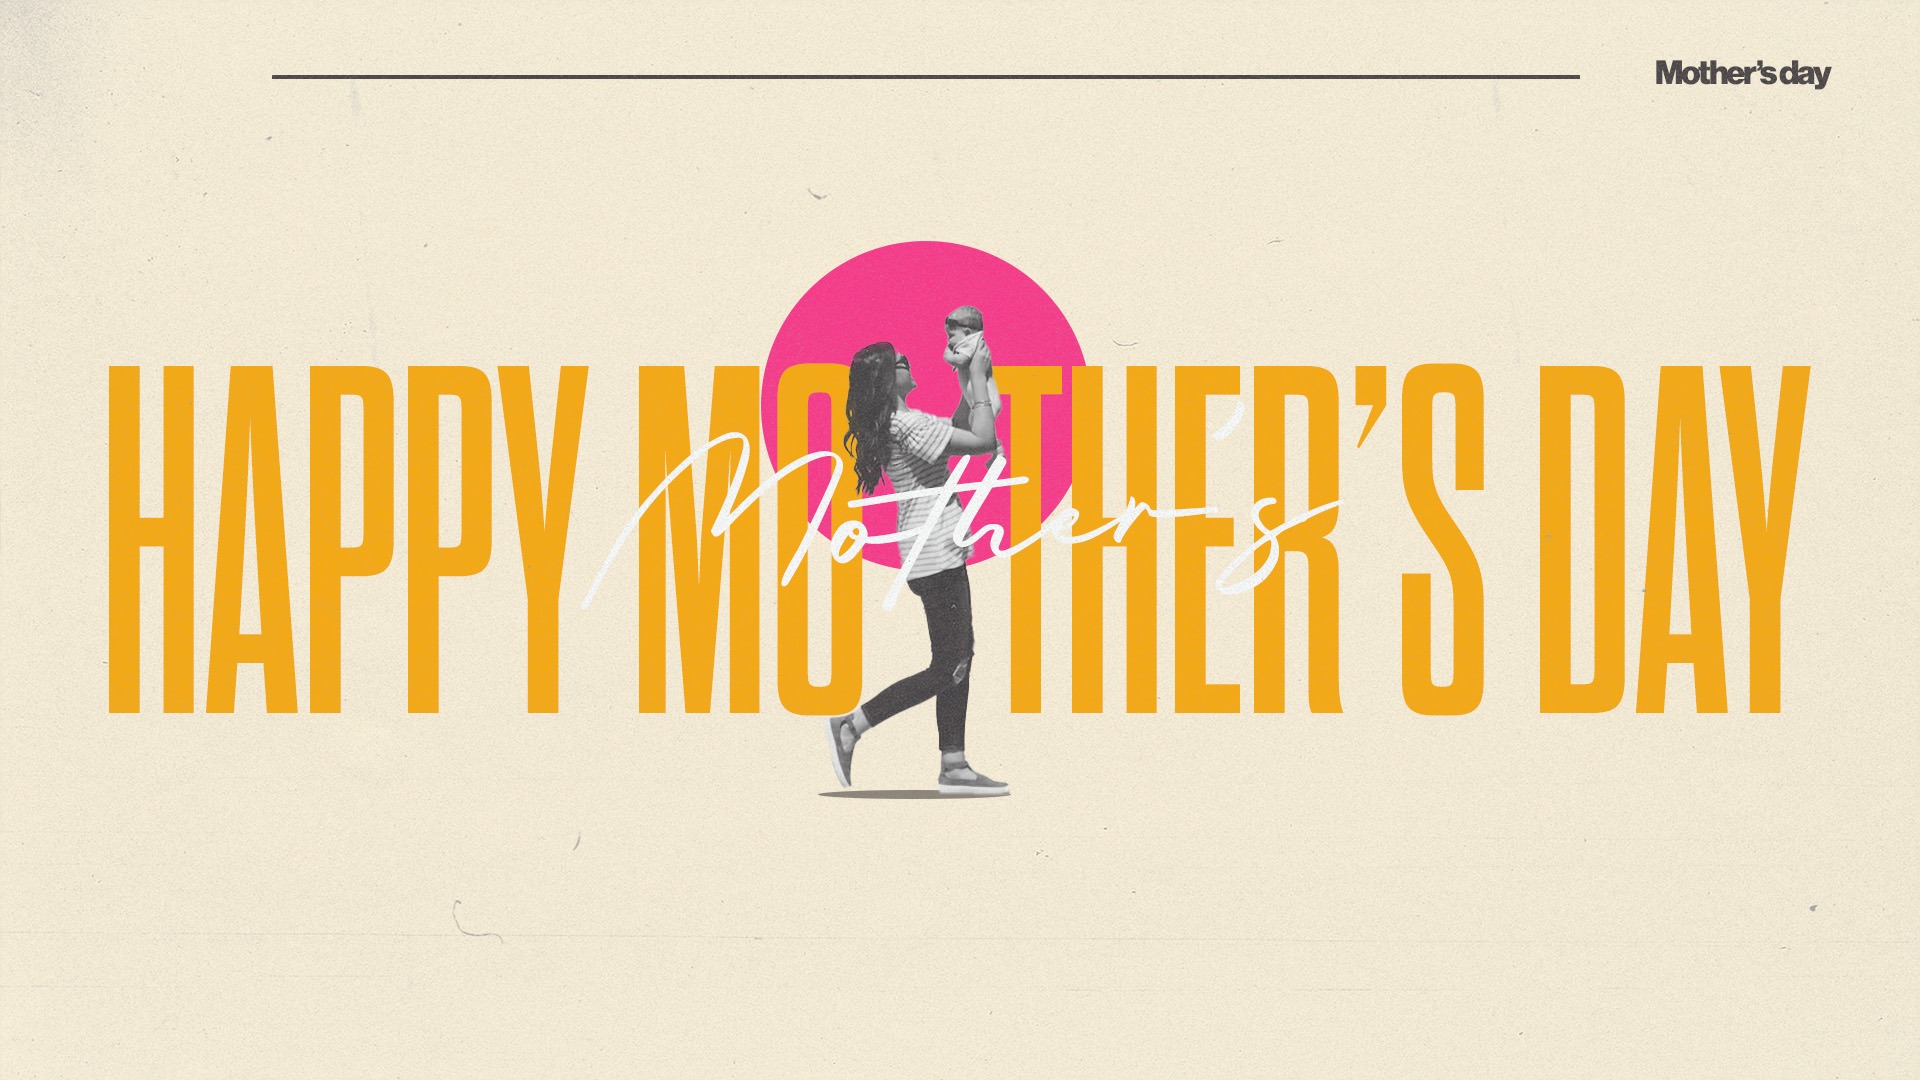 Mothers Day 03 sermon series graphics